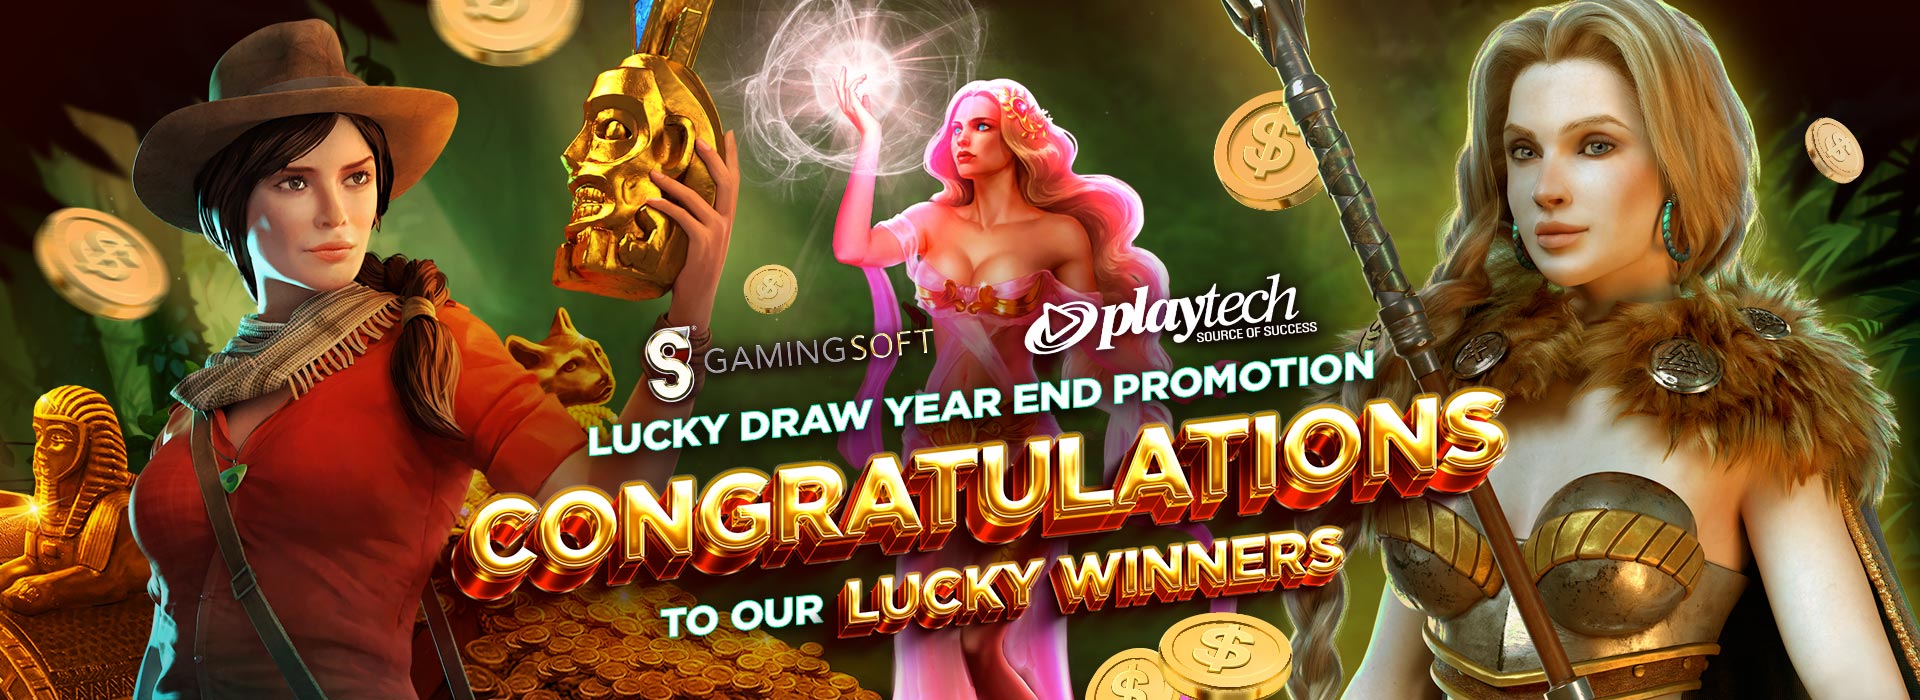 Congratulations! “GamingSoft - Playtech Lucky Draw Year End Promotion” Final Draw Winner Announcement 